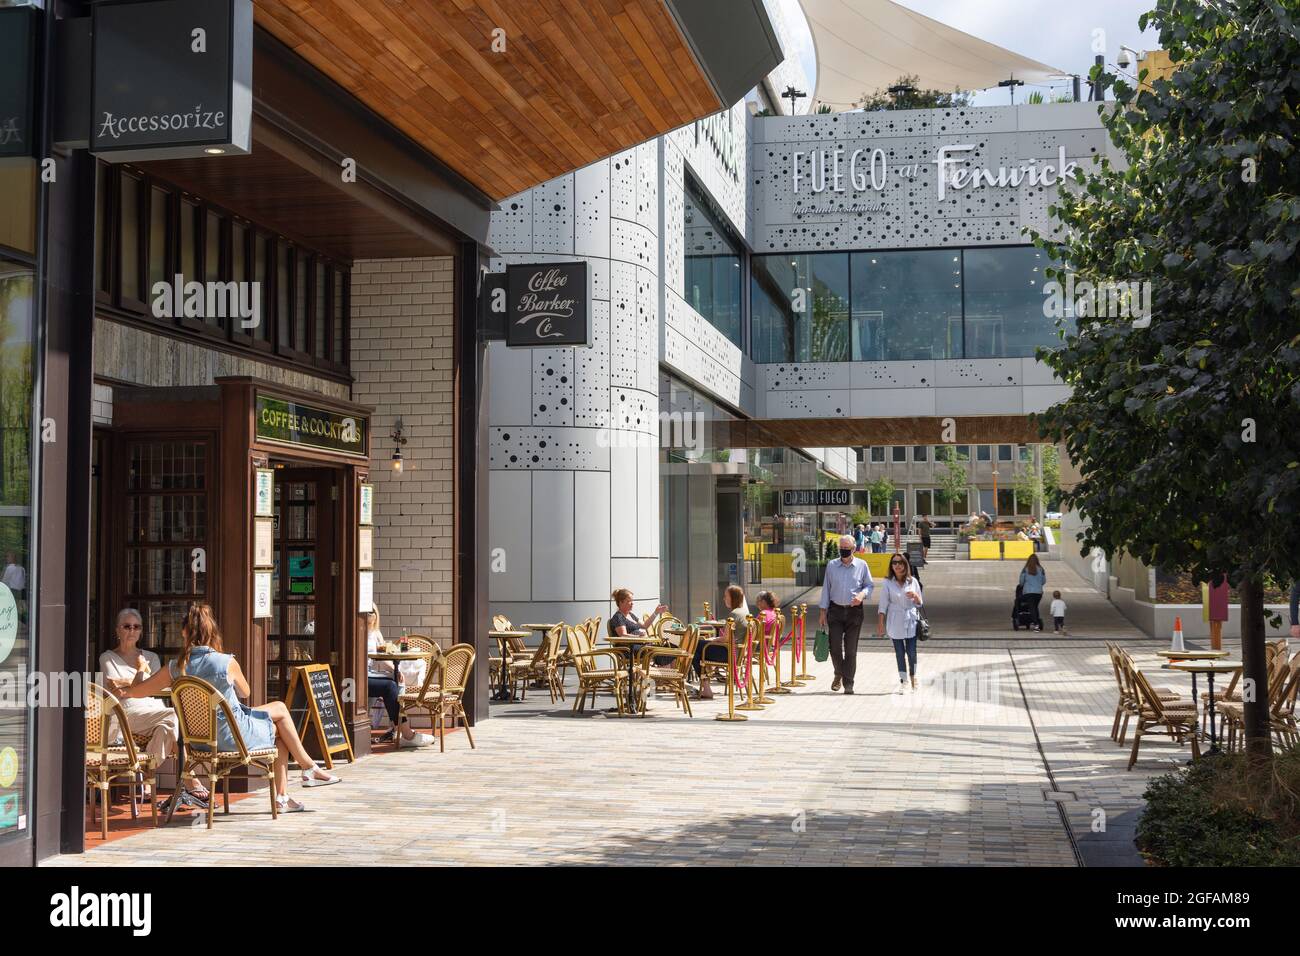 Barker Coffee Co and Fenwick department store, The Avenue, The Lexicon, Bracknell, Berkshire, England, United Kingdom Stock Photo